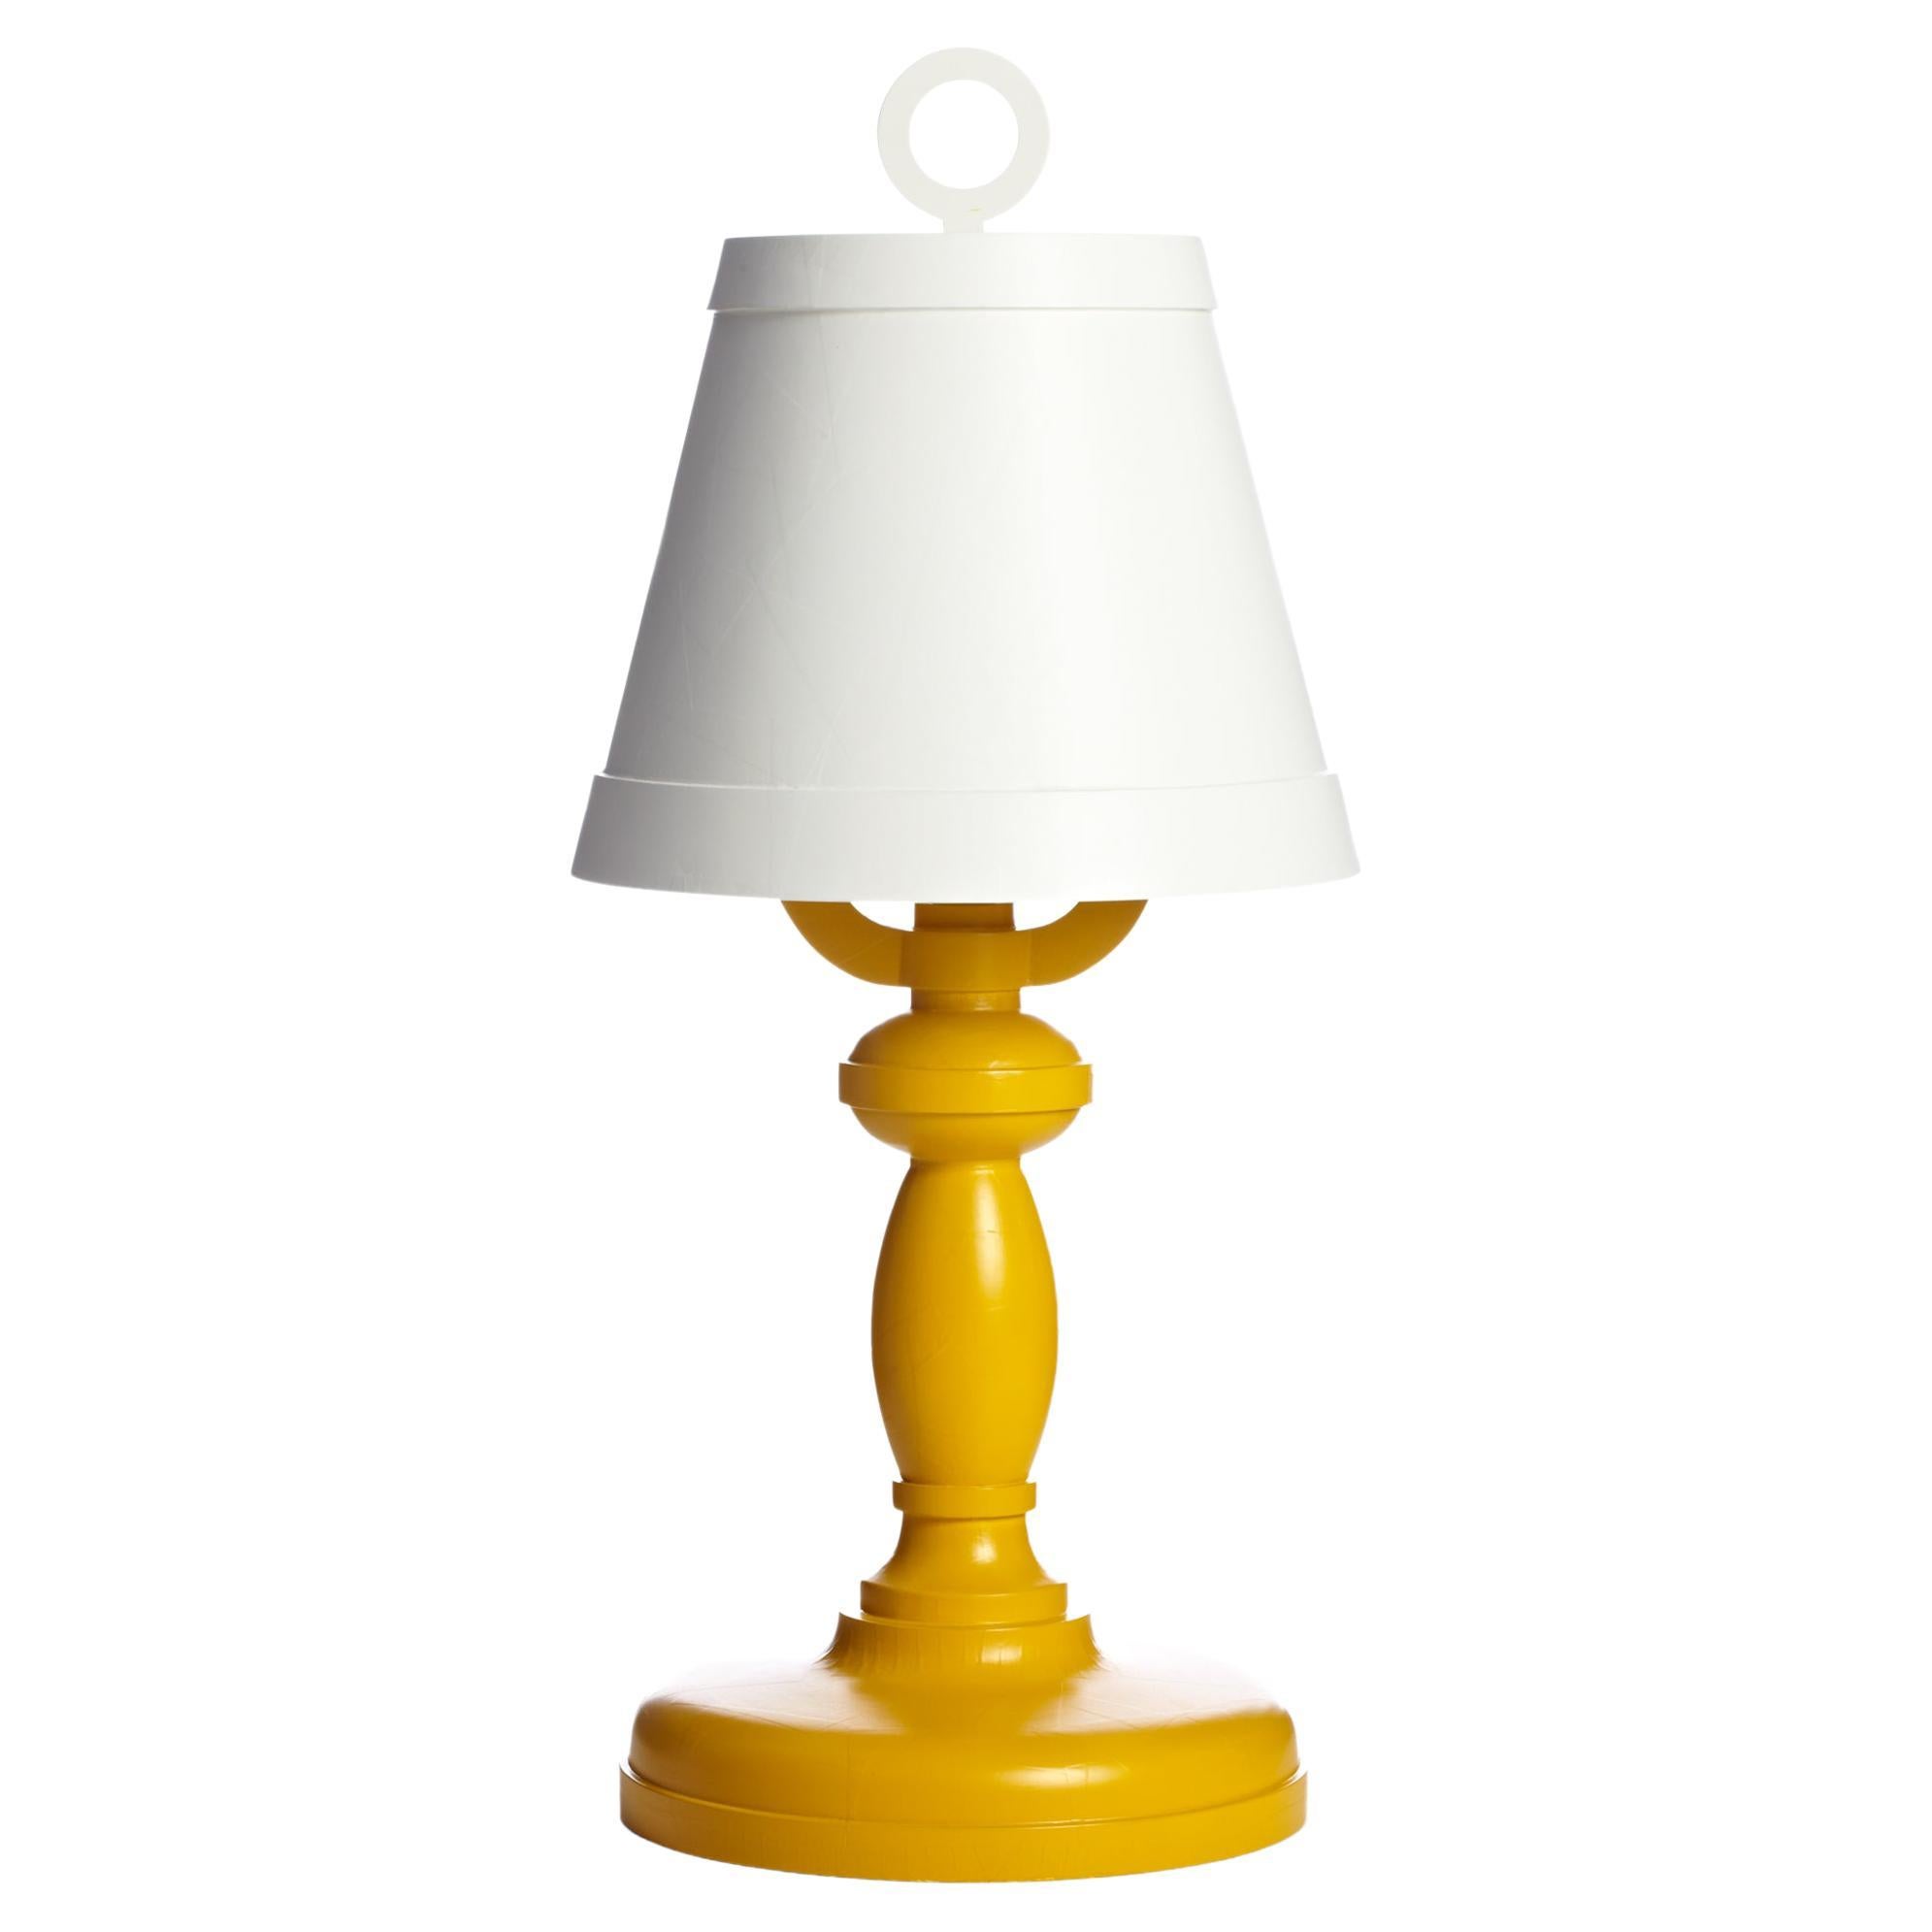 Moooi Paper Table Lamp in White Shade with Yellow Base by Studio Job